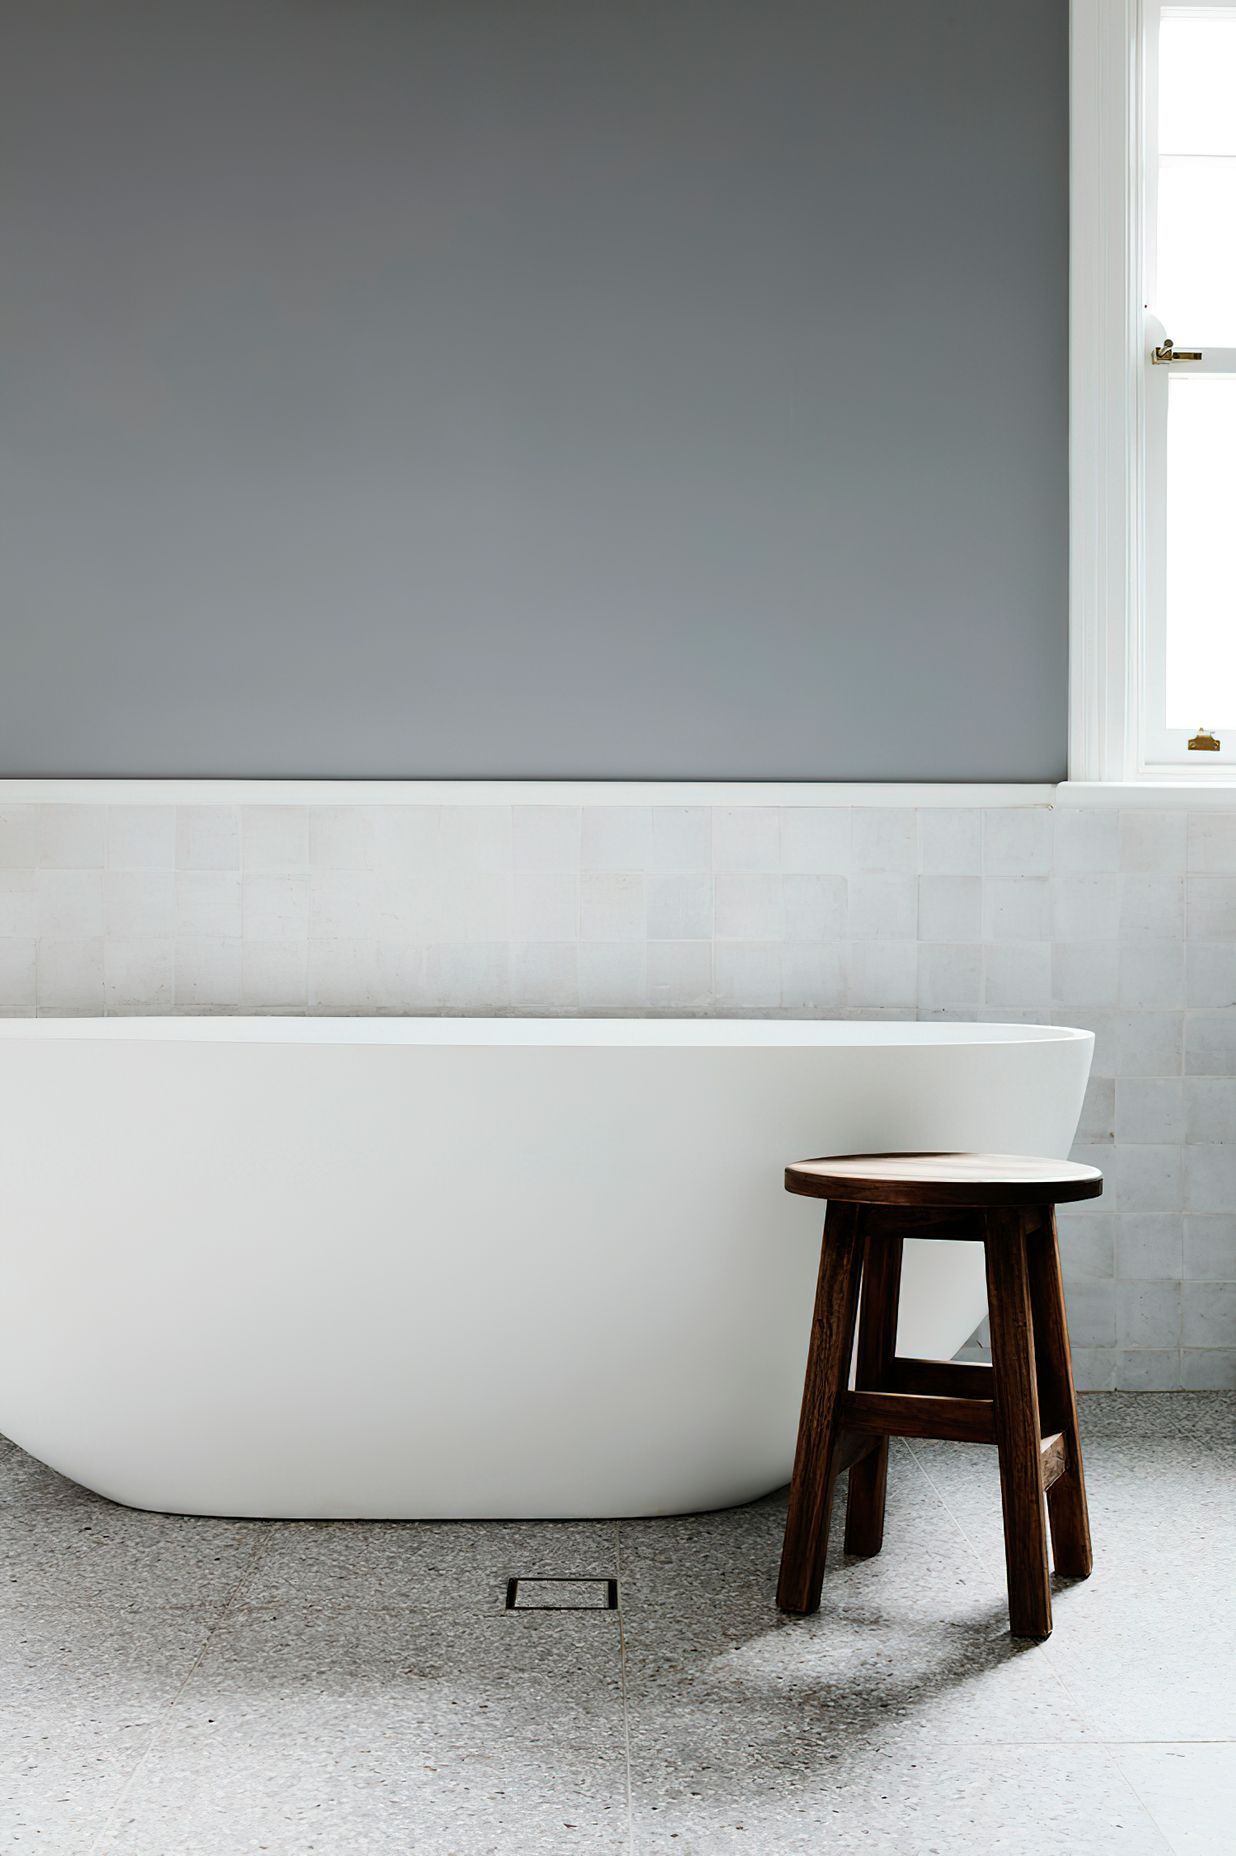 STAND ALONE BATH - The stand alone bath features in the ensuite.